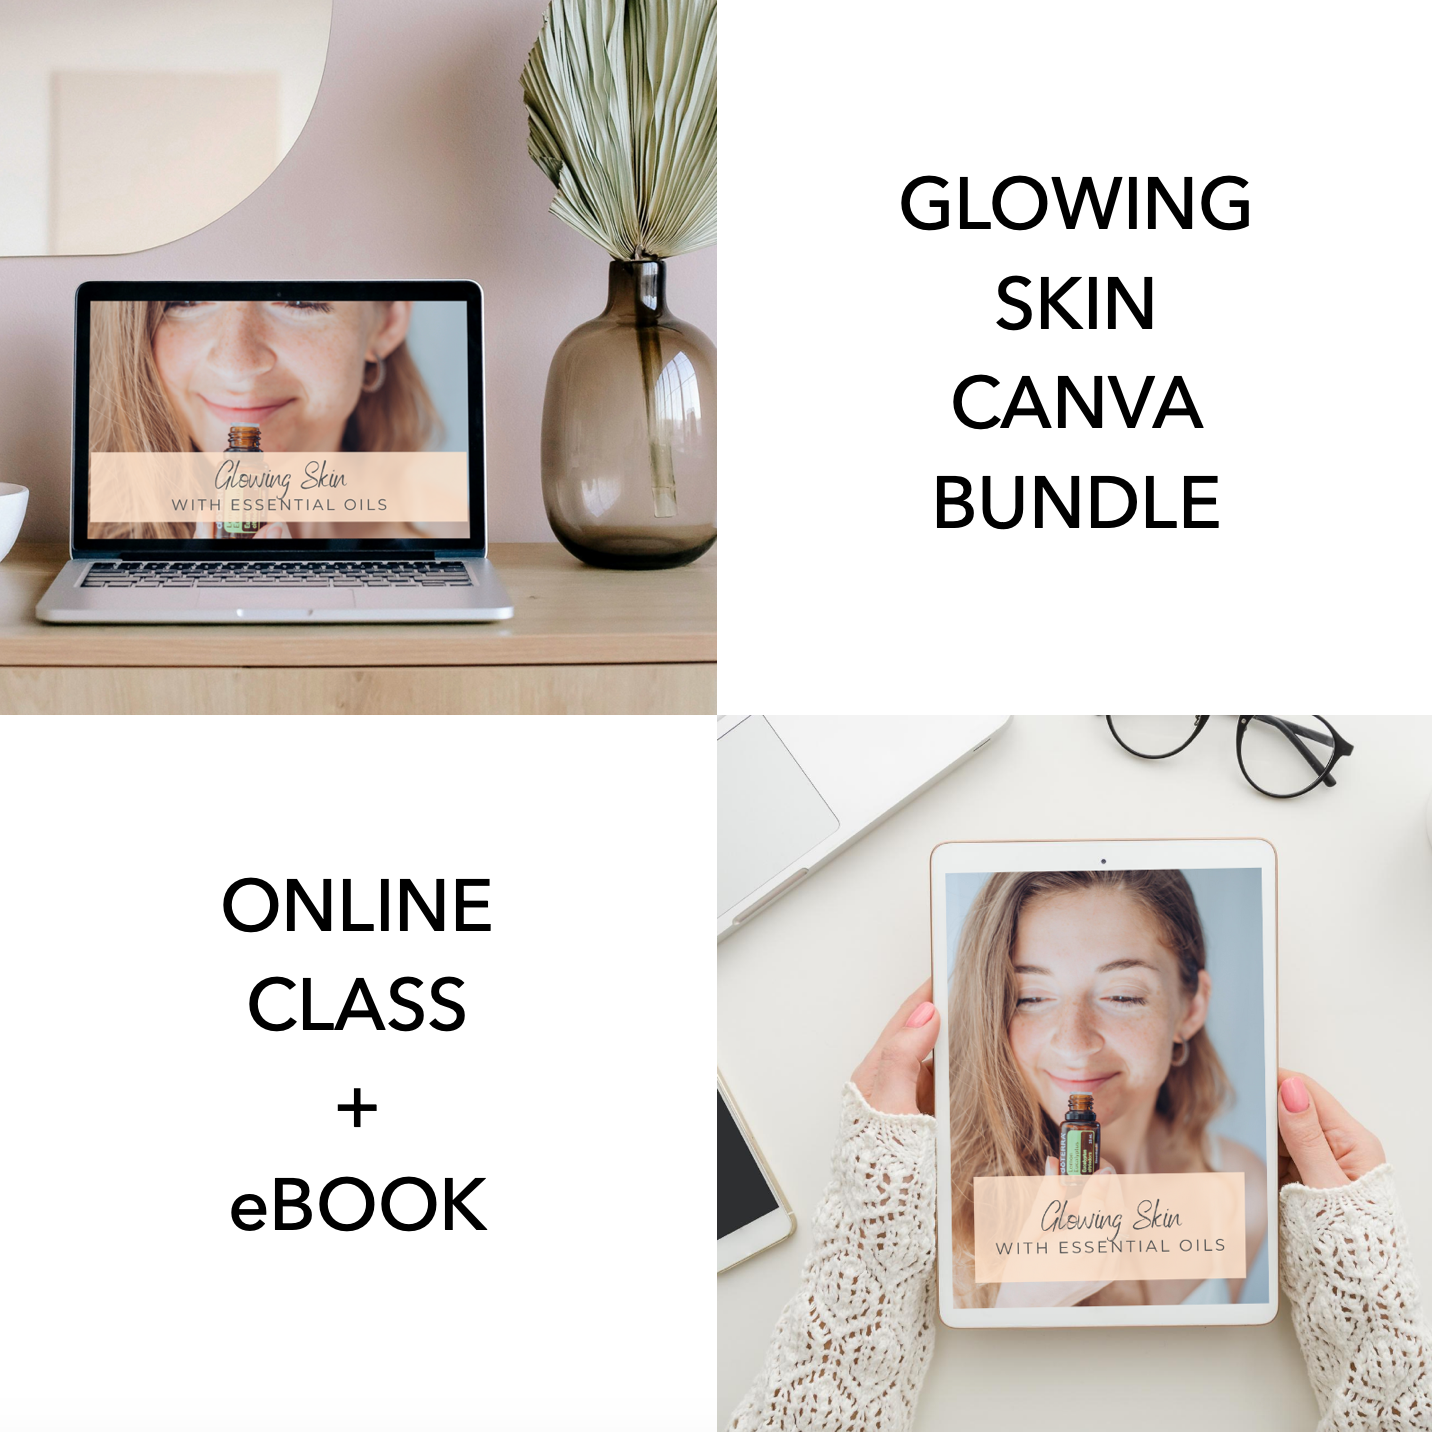 BUNDLE - Glowing Skin with Essential Oils Online Class + eBOOK